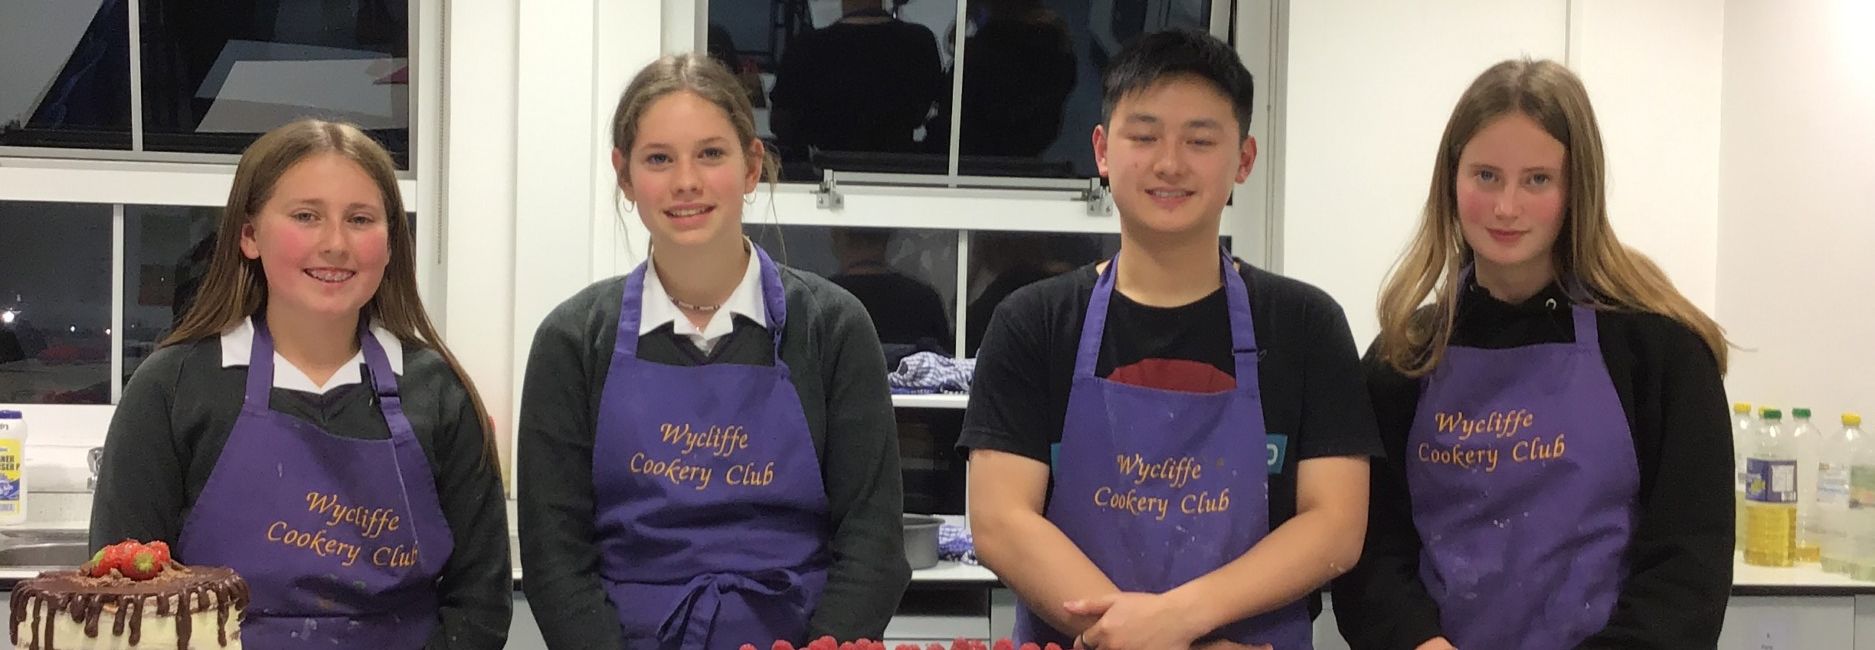 image of cooking club at wycliffe school in gloucestershire